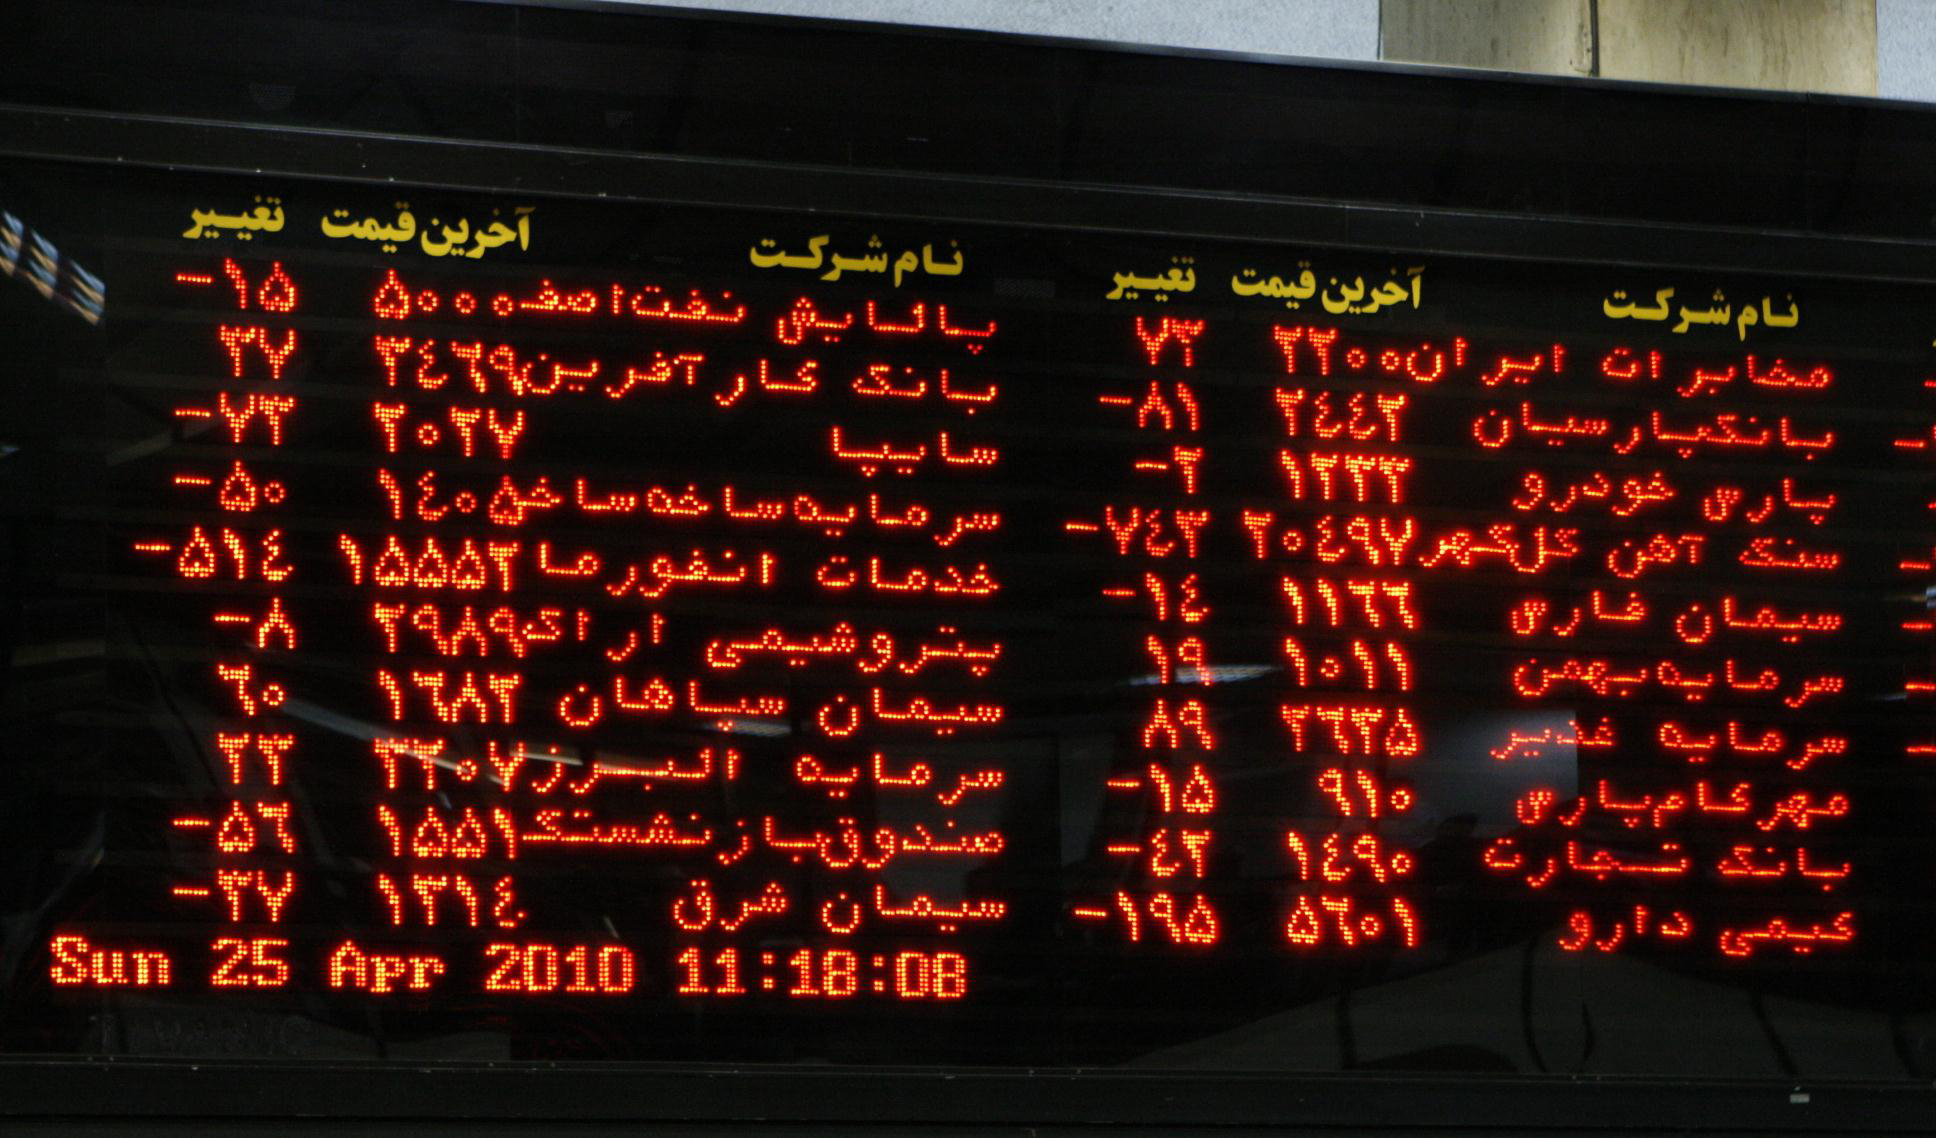 A Foretaste of New Forex Plan: Iran Stocks Rise to Notch New High